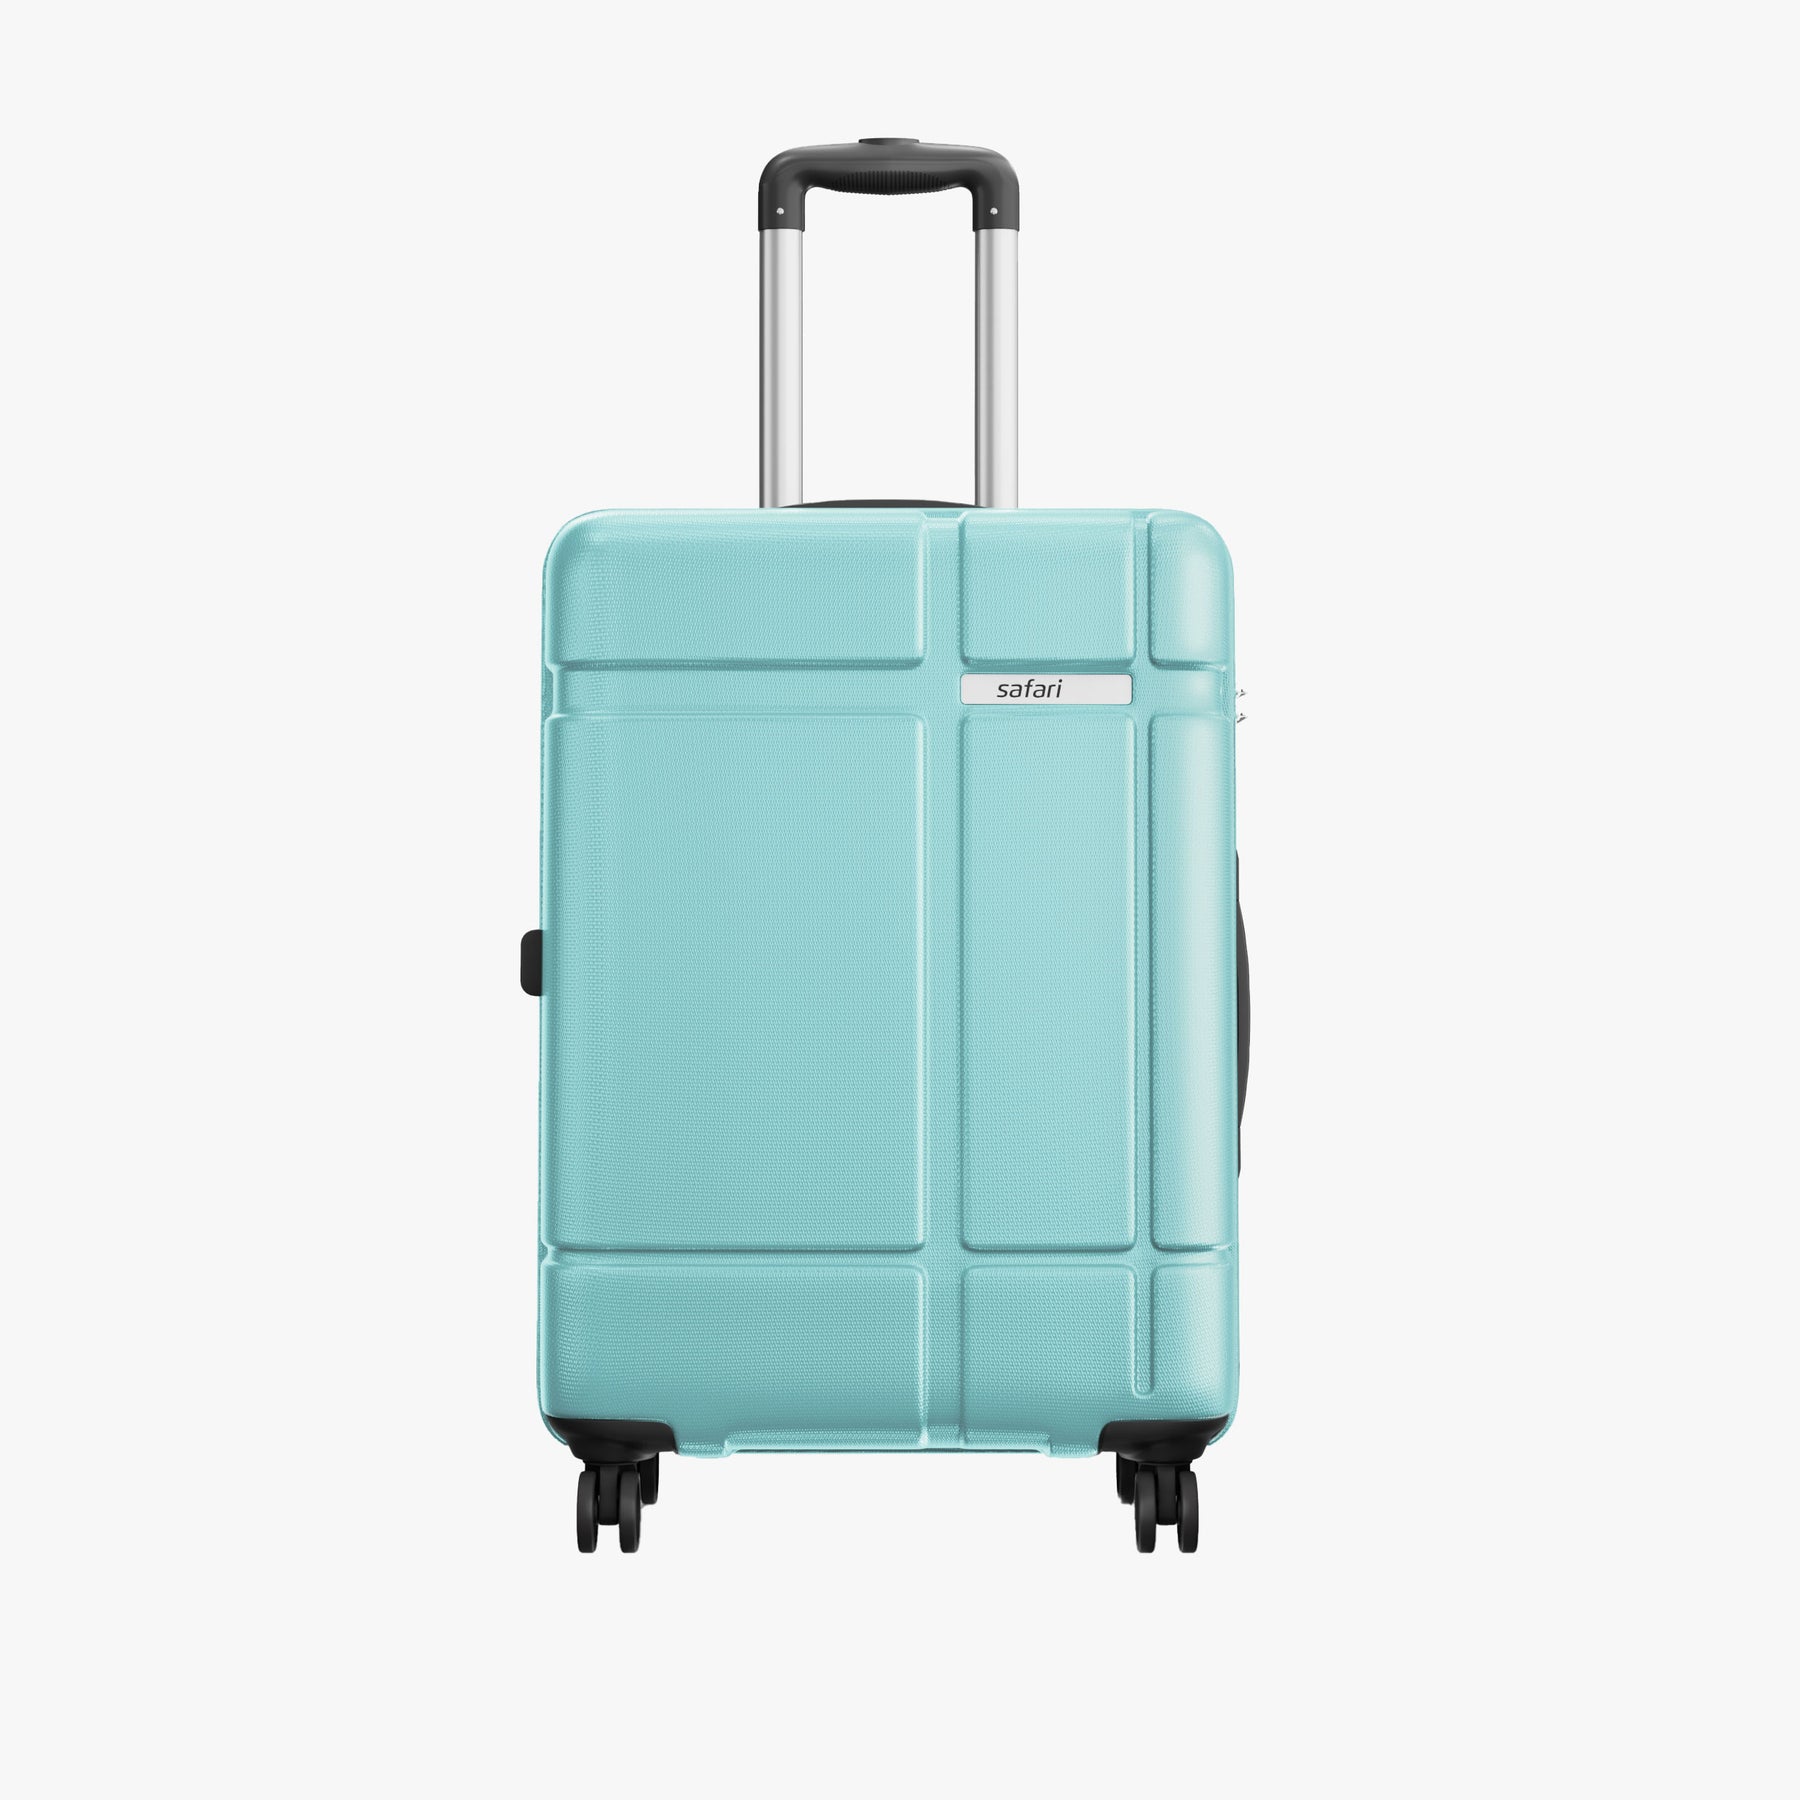 Route Hard Luggage With Dual Wheels Combo (Small and Medium) - Spearmint